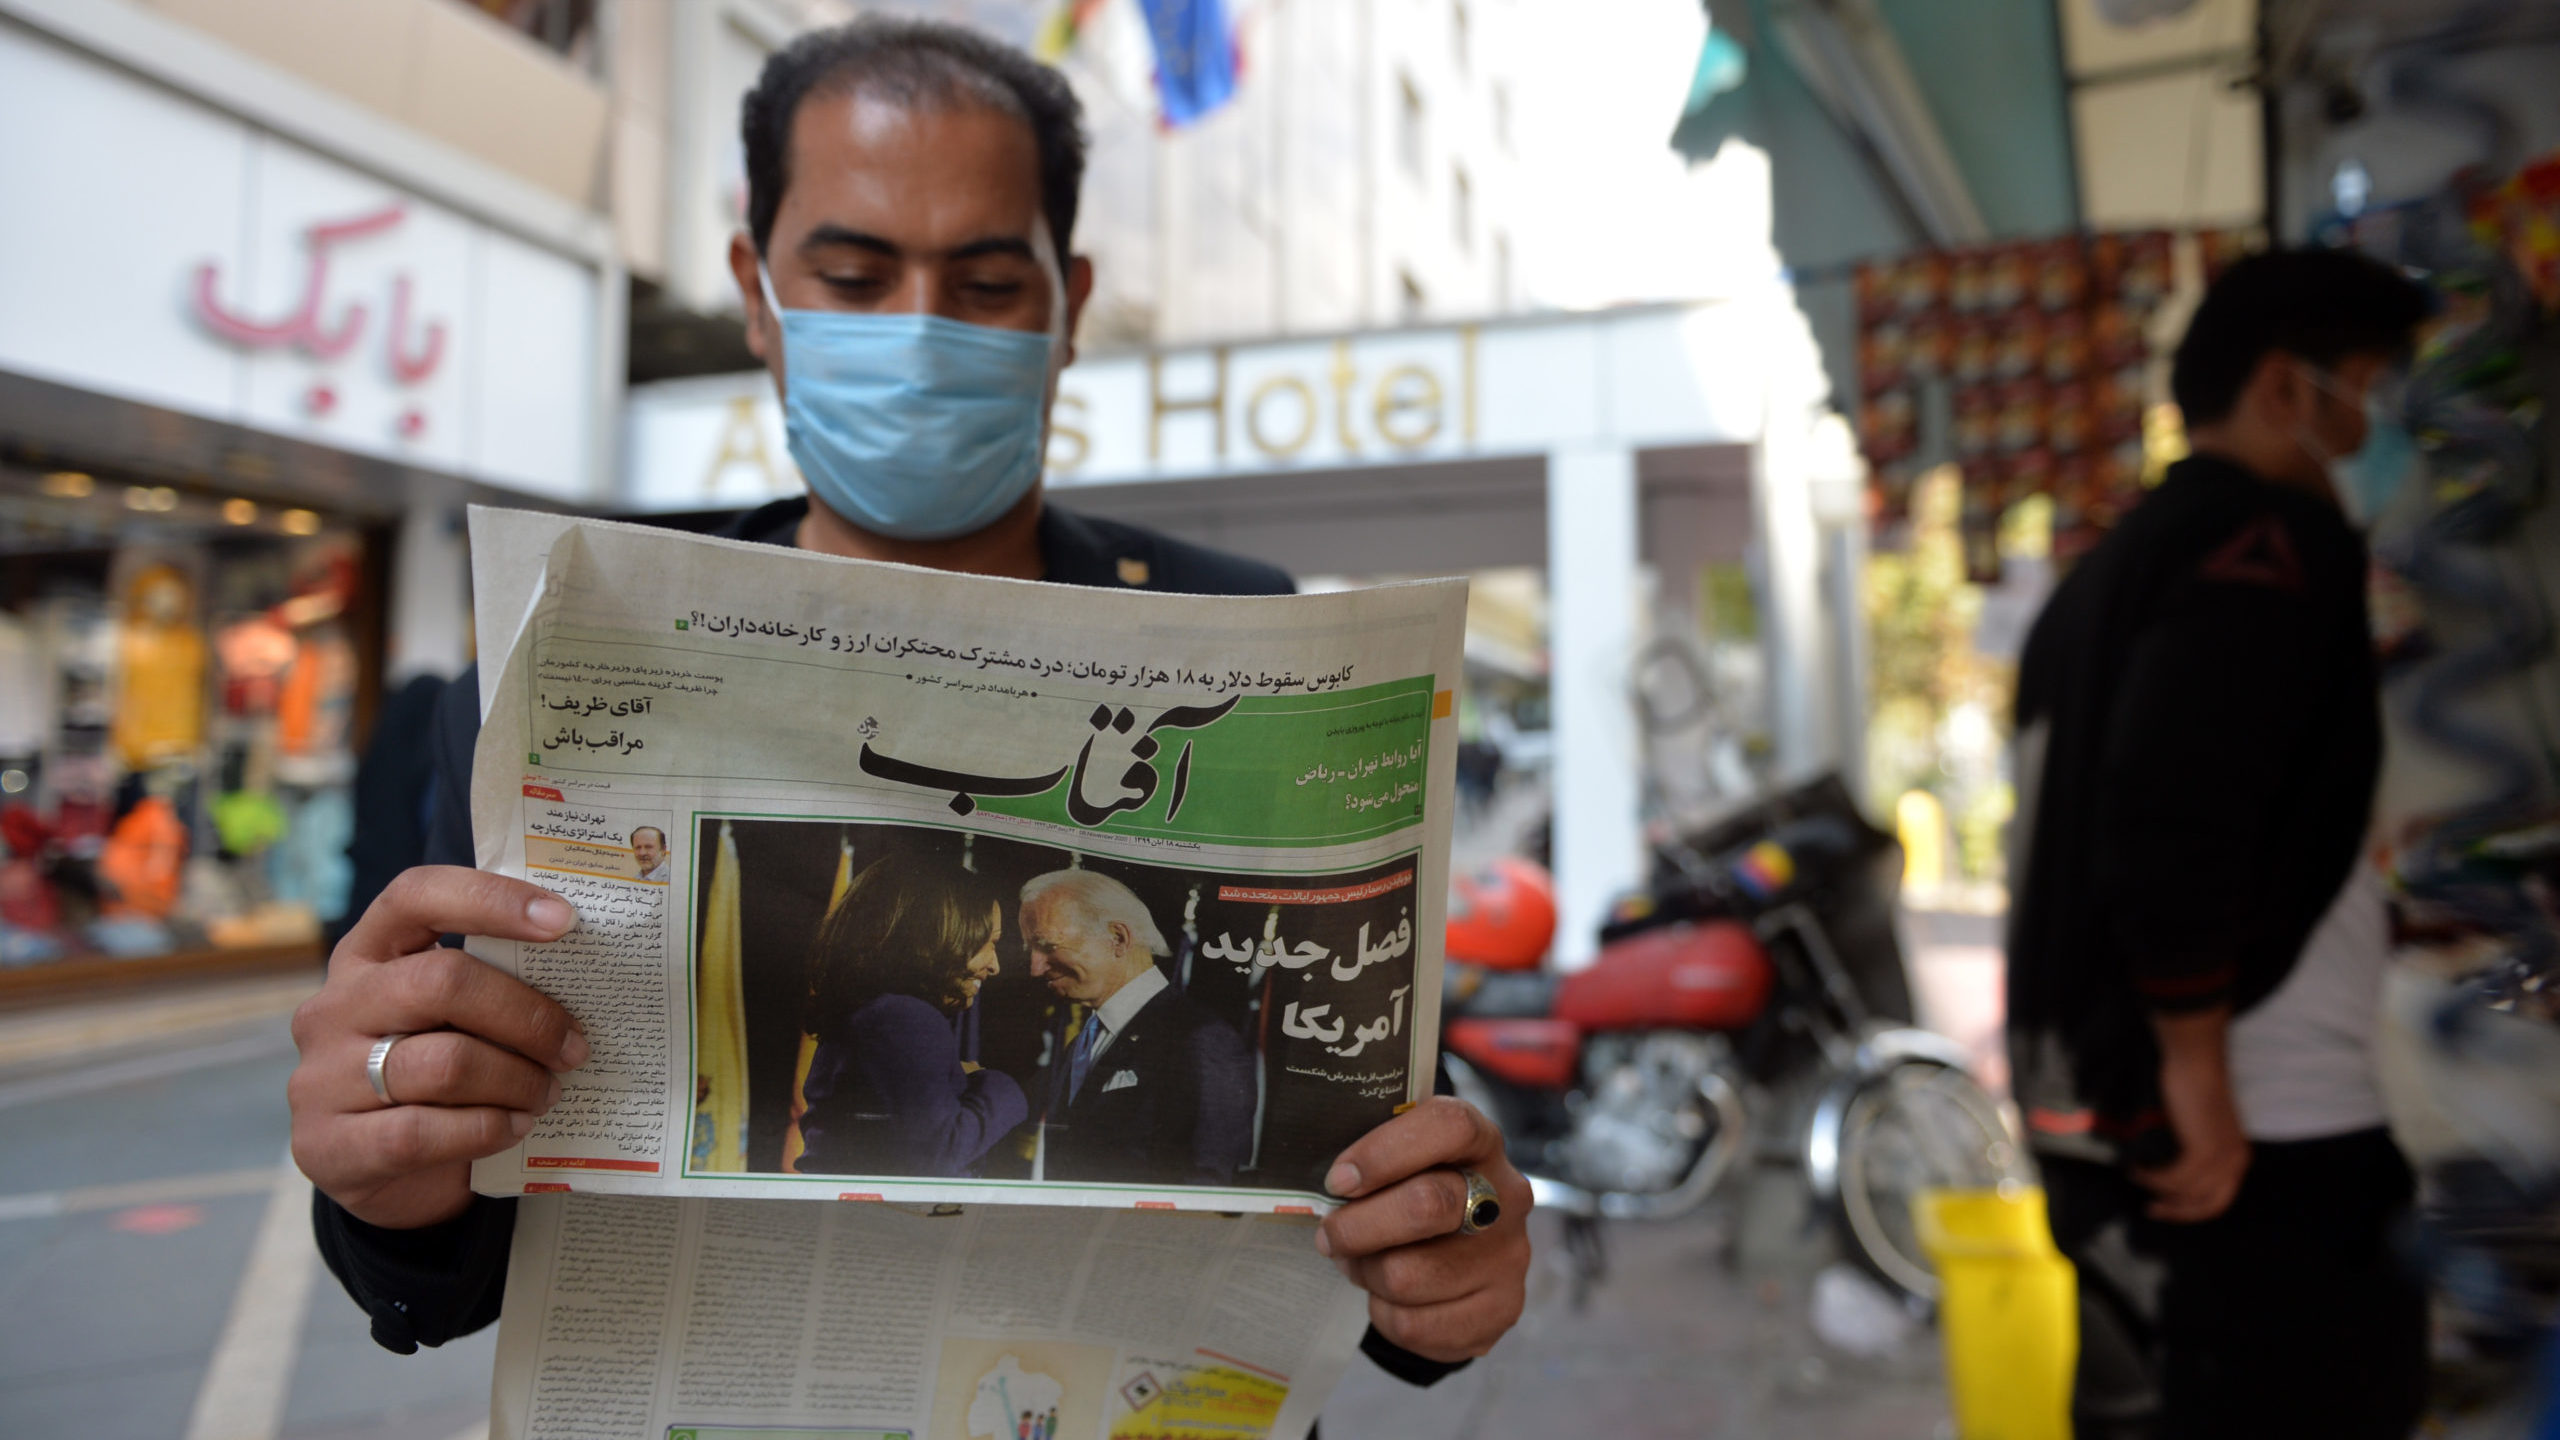 Analysts: Tehran Will Not Renegotiate Nuclear Deal With Biden